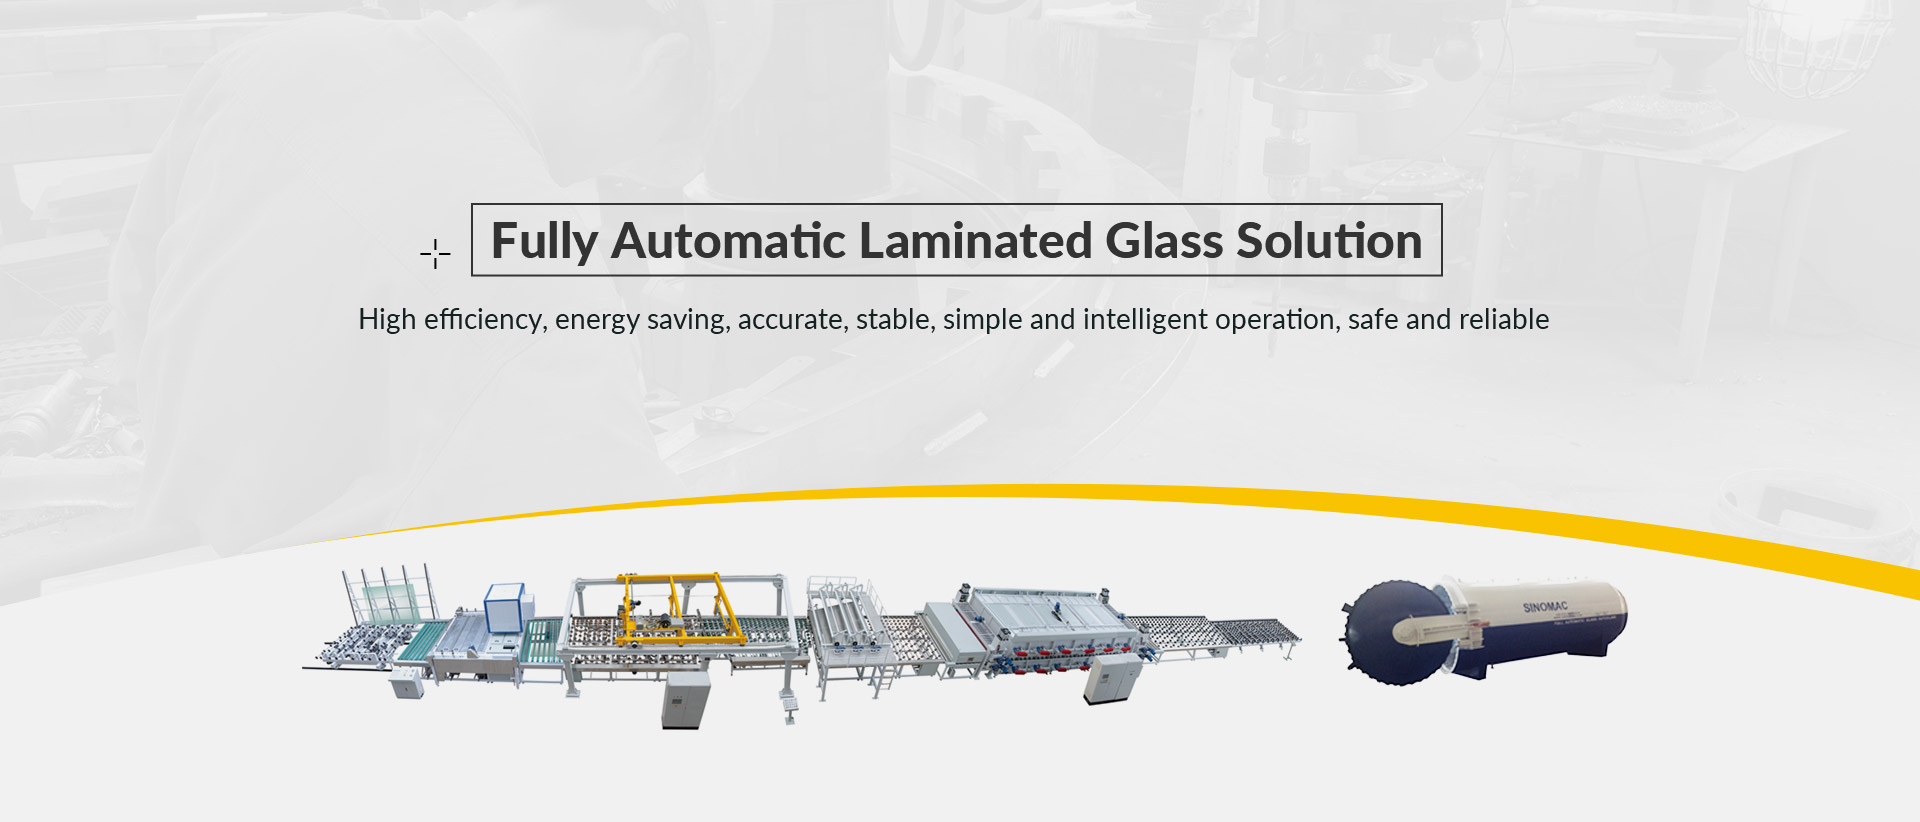 Fully Automatic Laminated Glass Solution